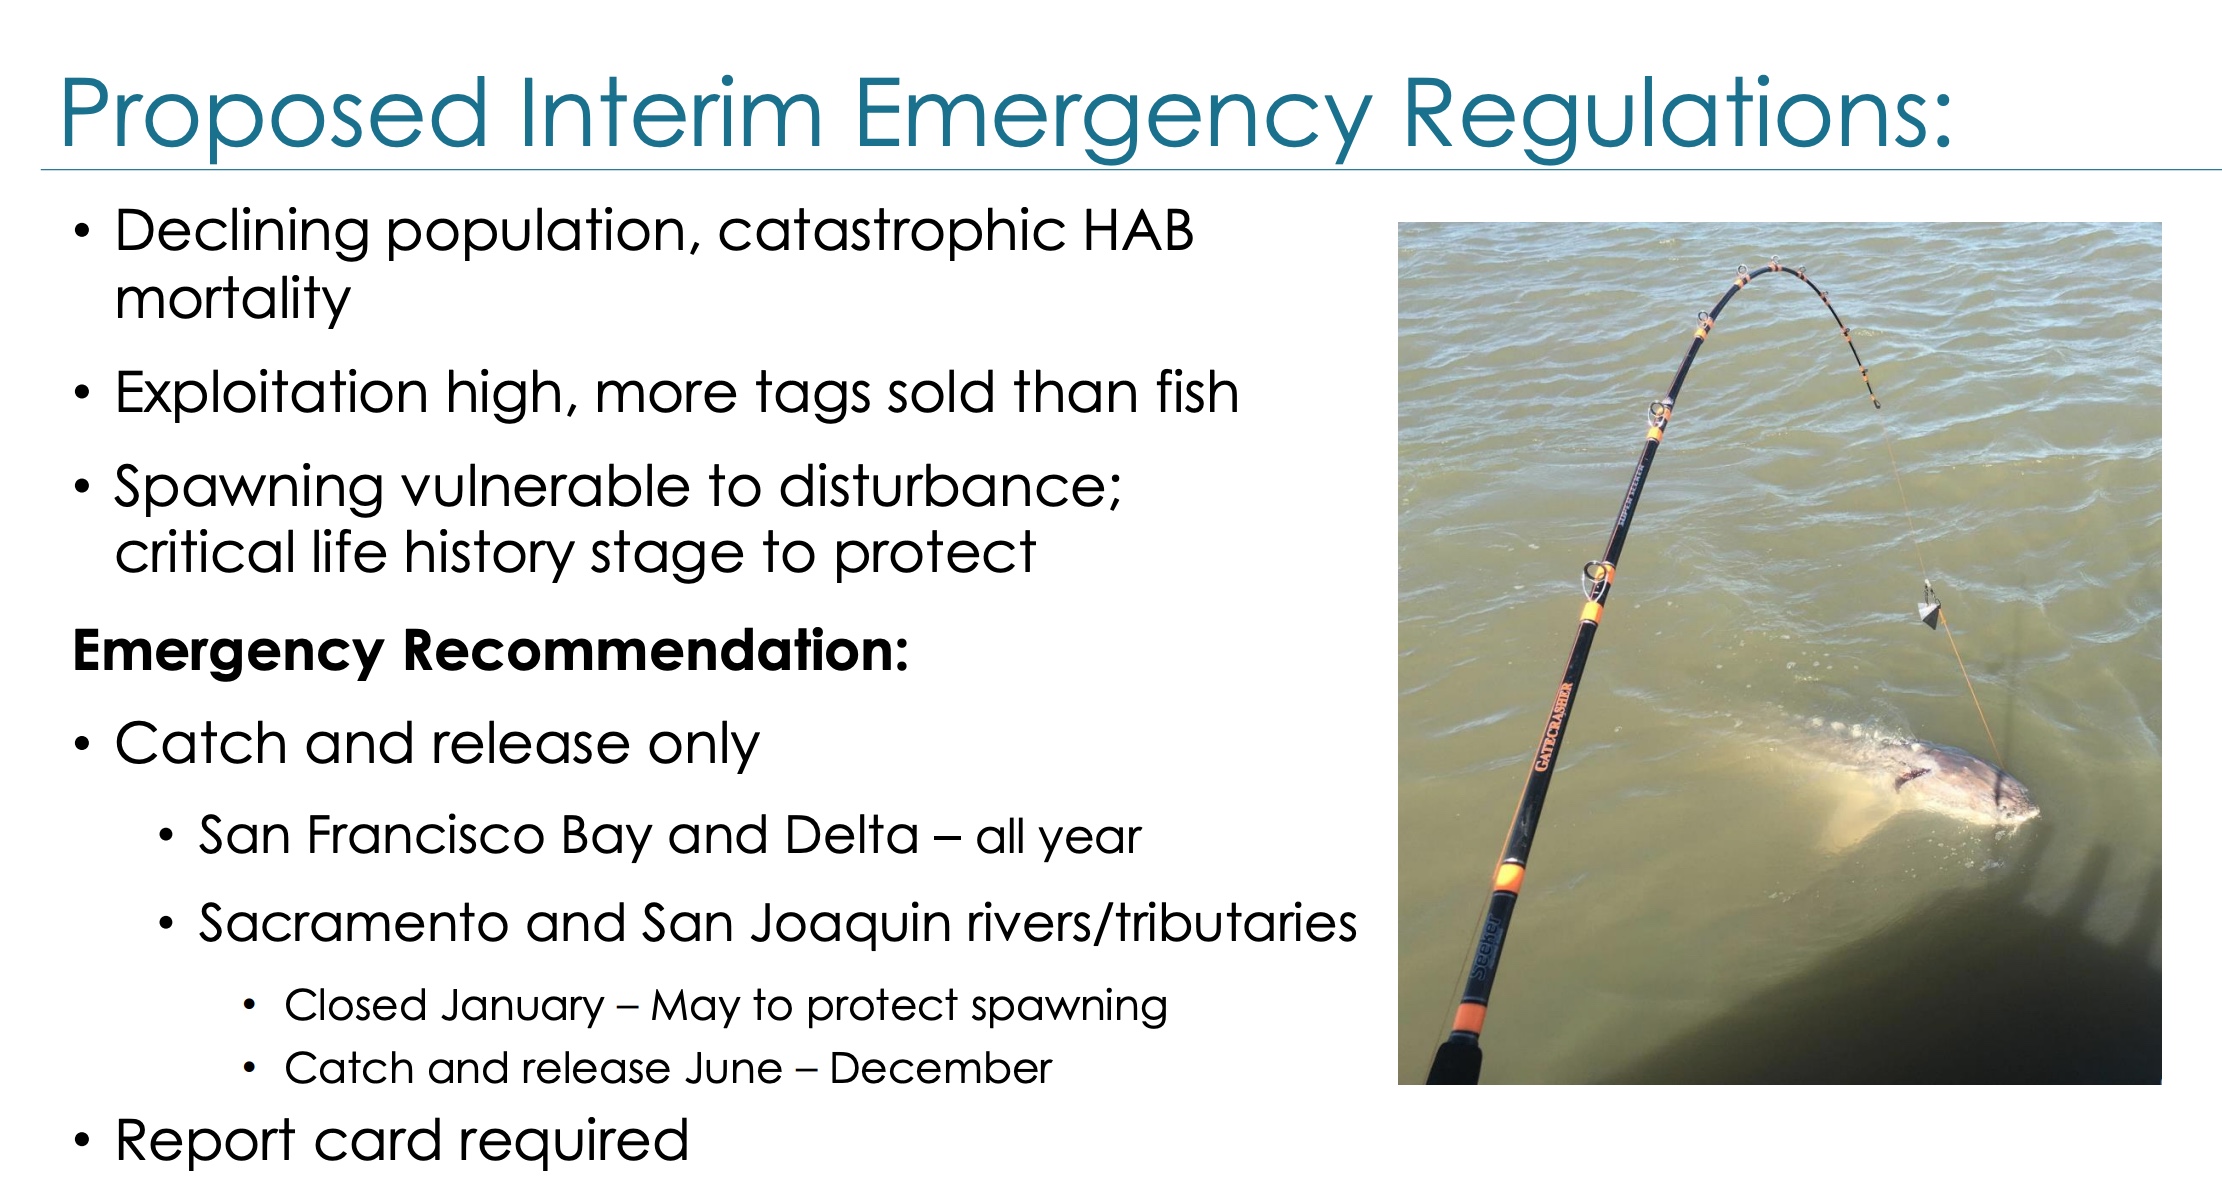 Recommendations for emergency white sturgeon regulations to be